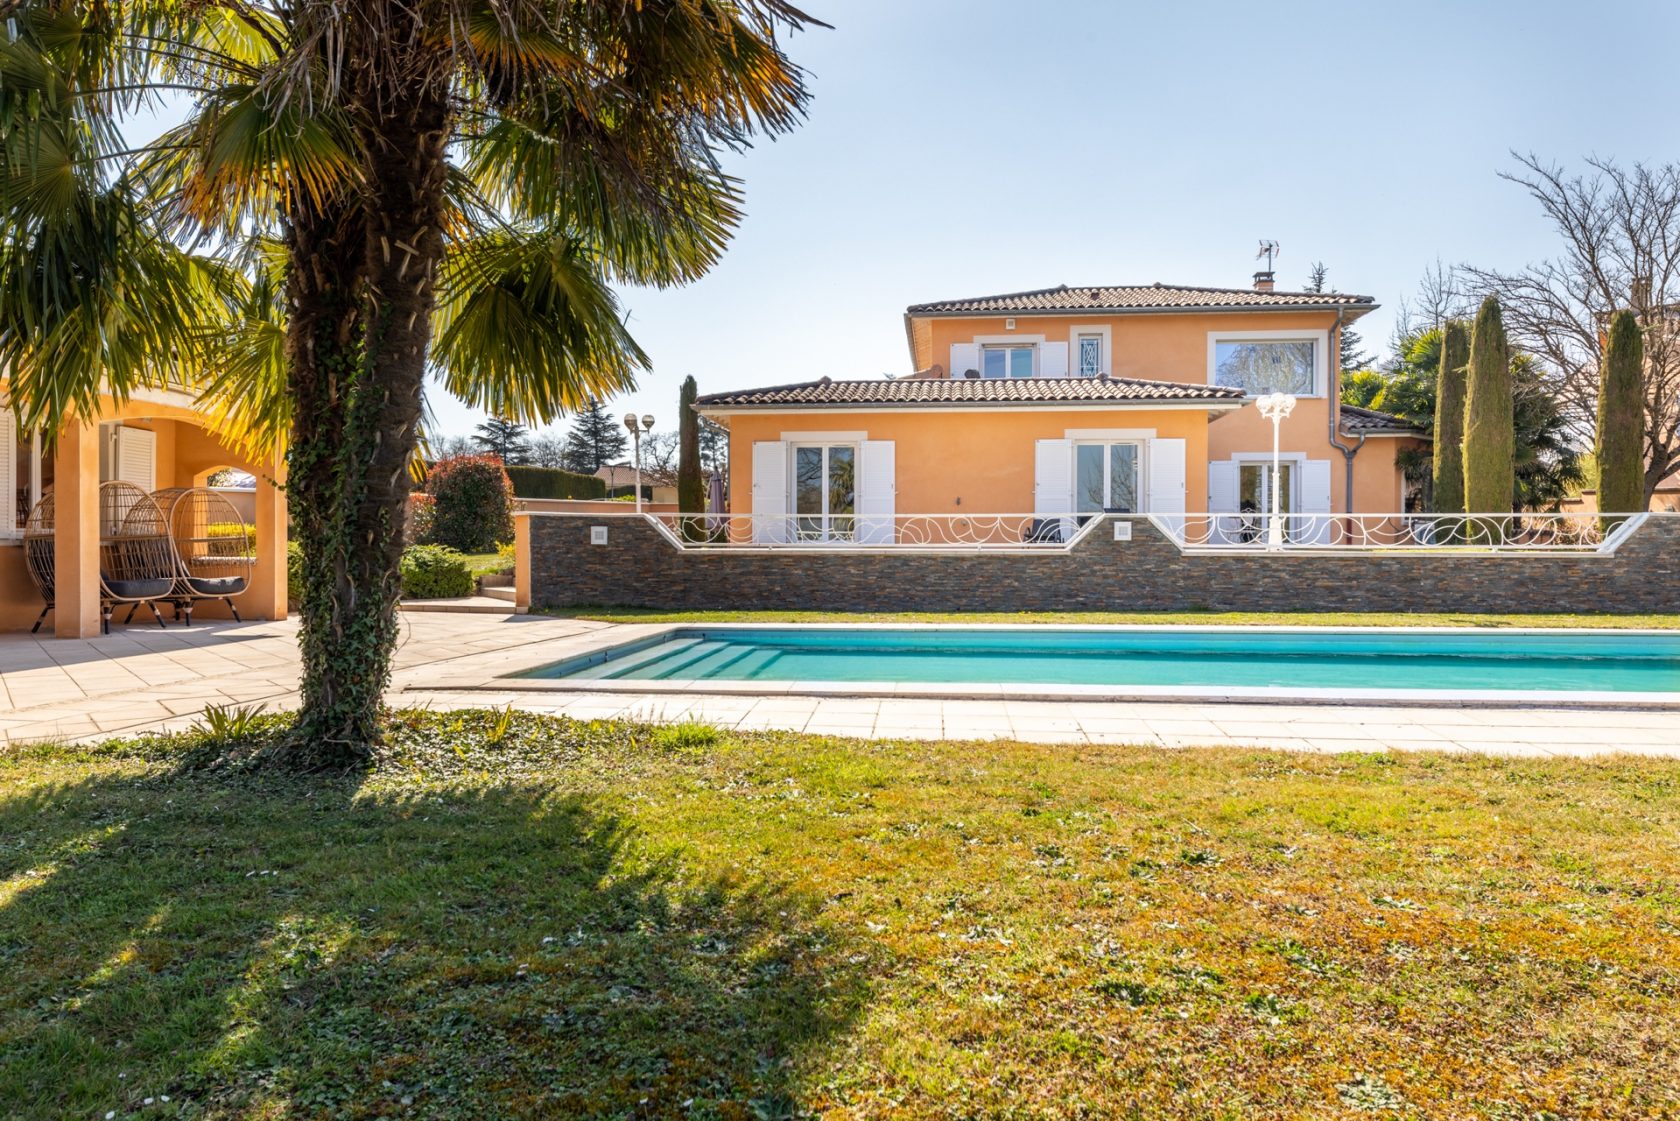 House on the banks of the Rhône with swimming pool